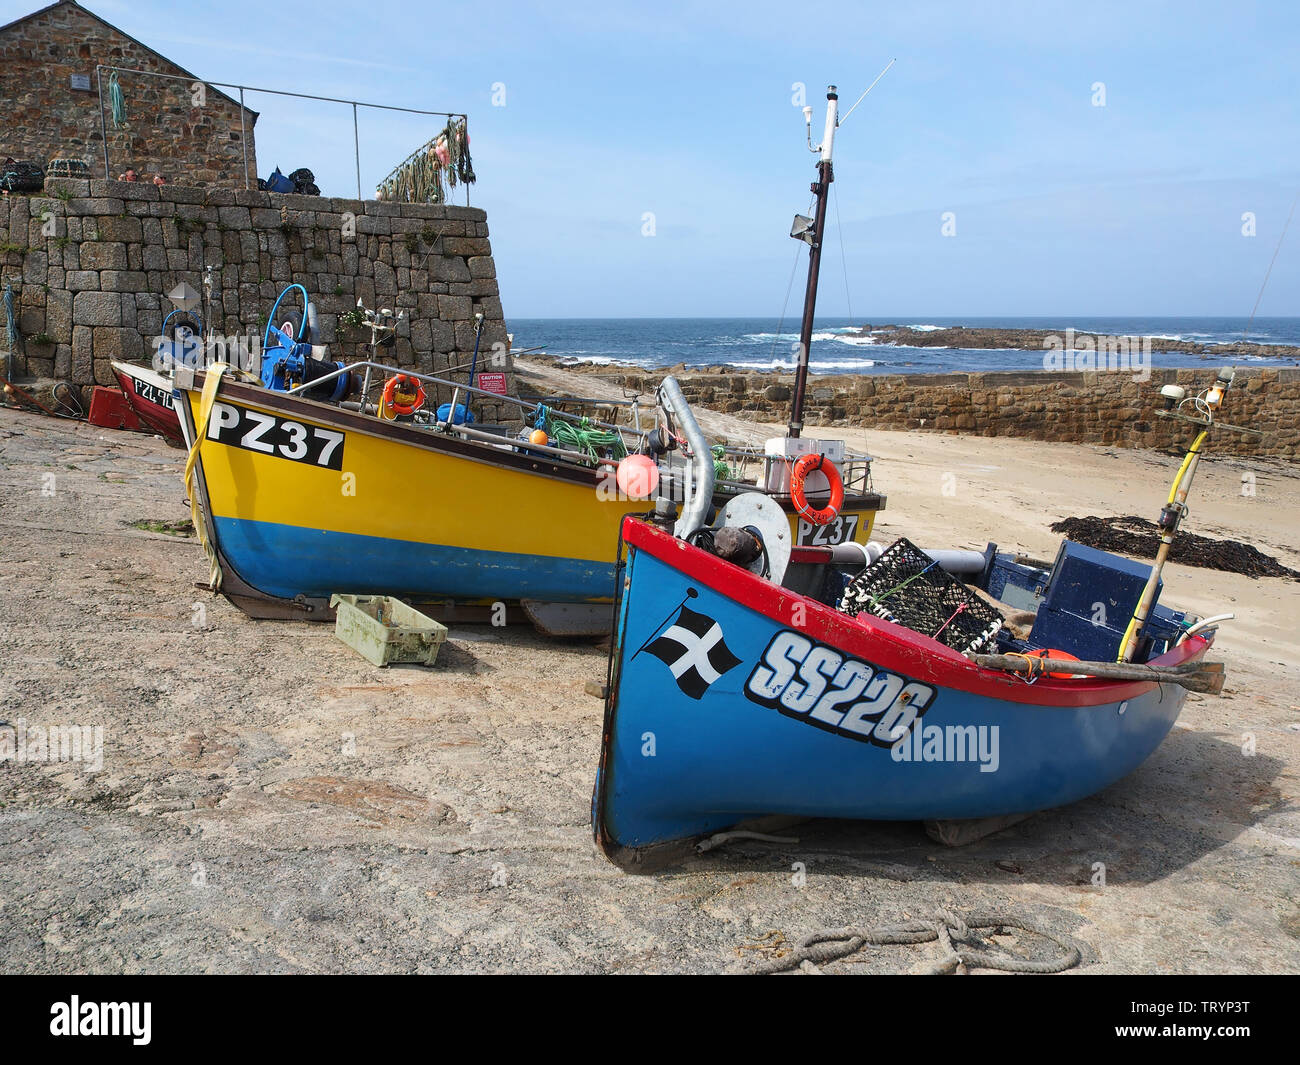 A group of very colourful fishing boats hauled up on to the quay at Sennen Cove, Cornwall, England, with the blue sky and blue sea beyond. Stock Photo